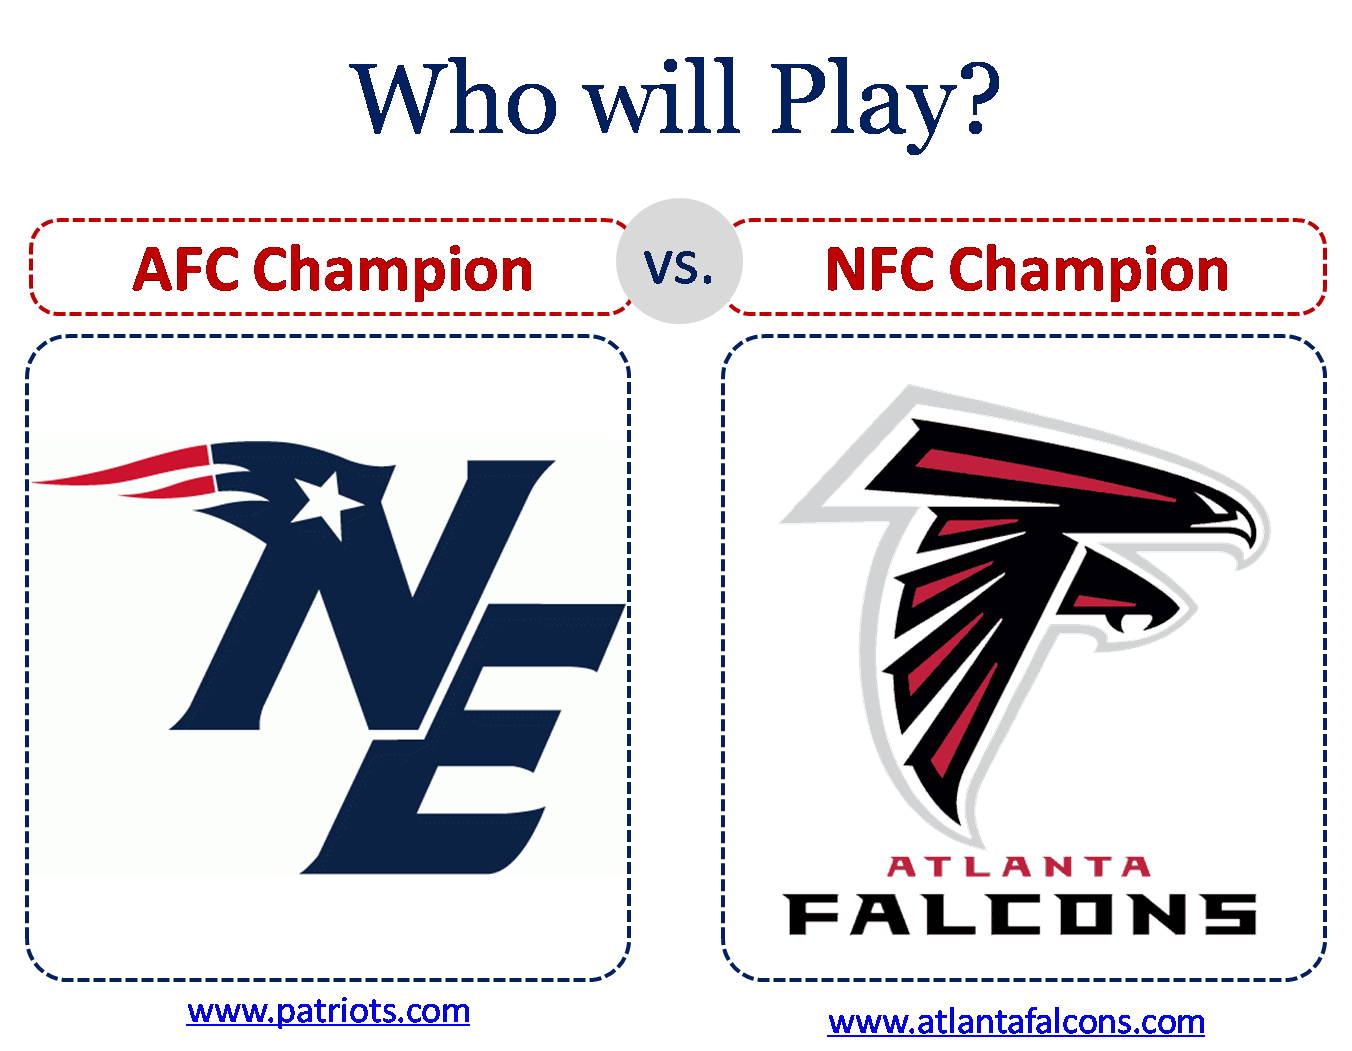 Super Bowl Appearances Review from 1967 to 2017 for the two competing teams, namely, the New England Patriots and Atlanta Falcons